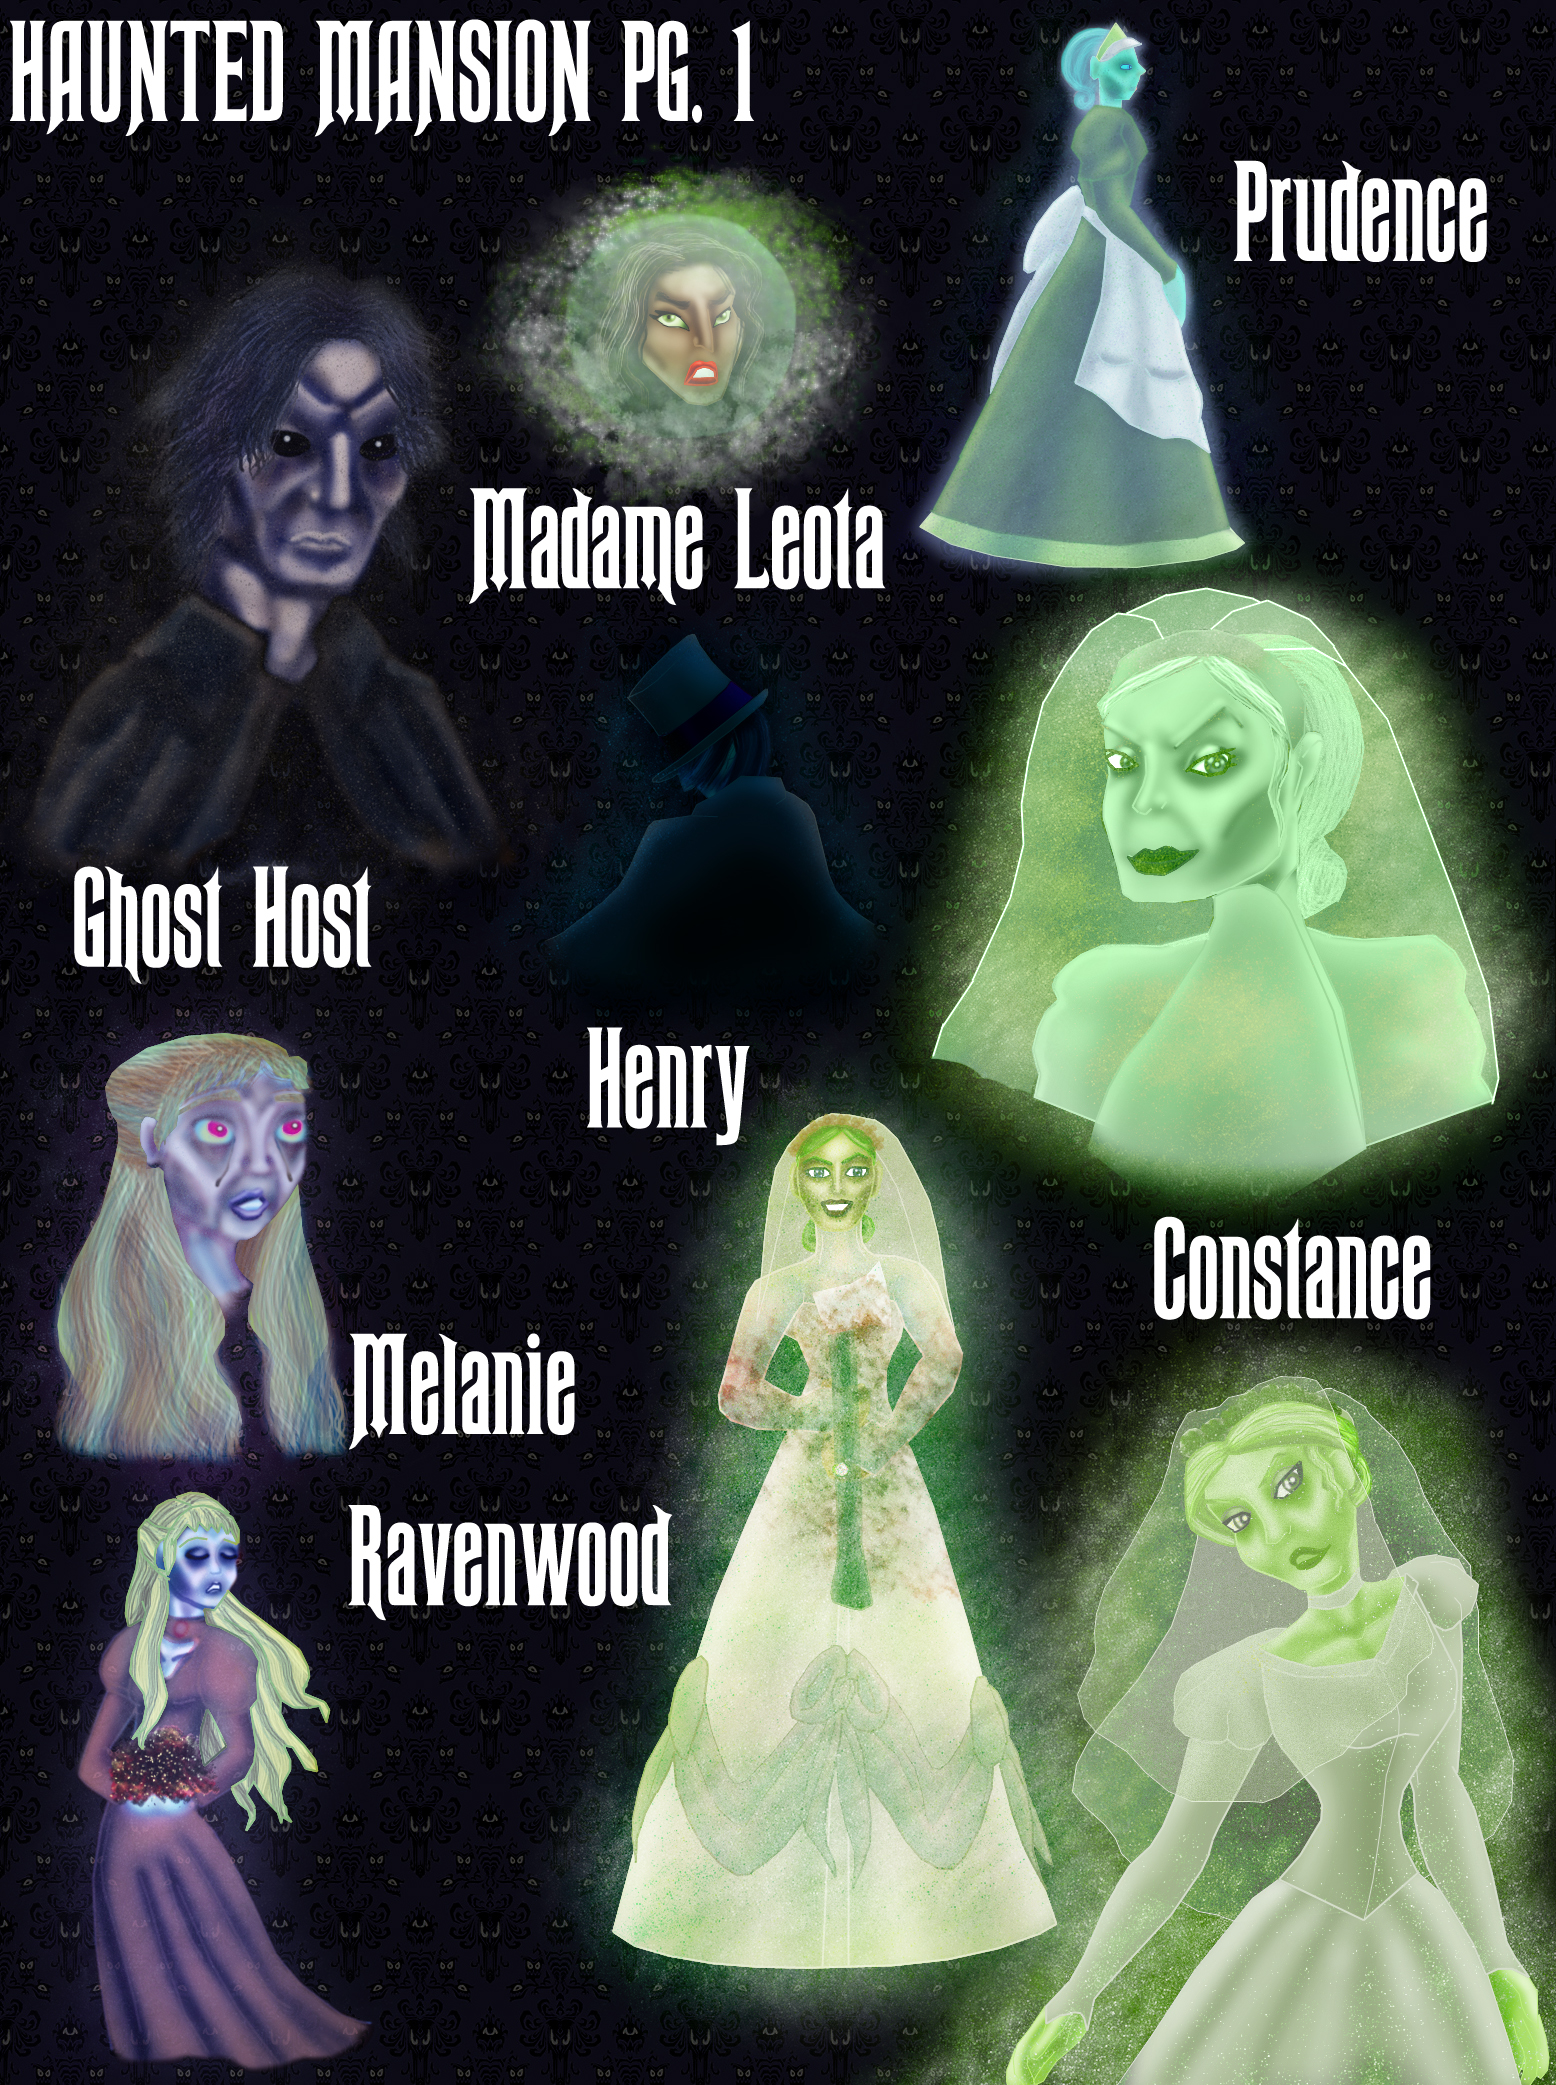 Haunted_Mansion_pg_1_by_Valor1387.jpg